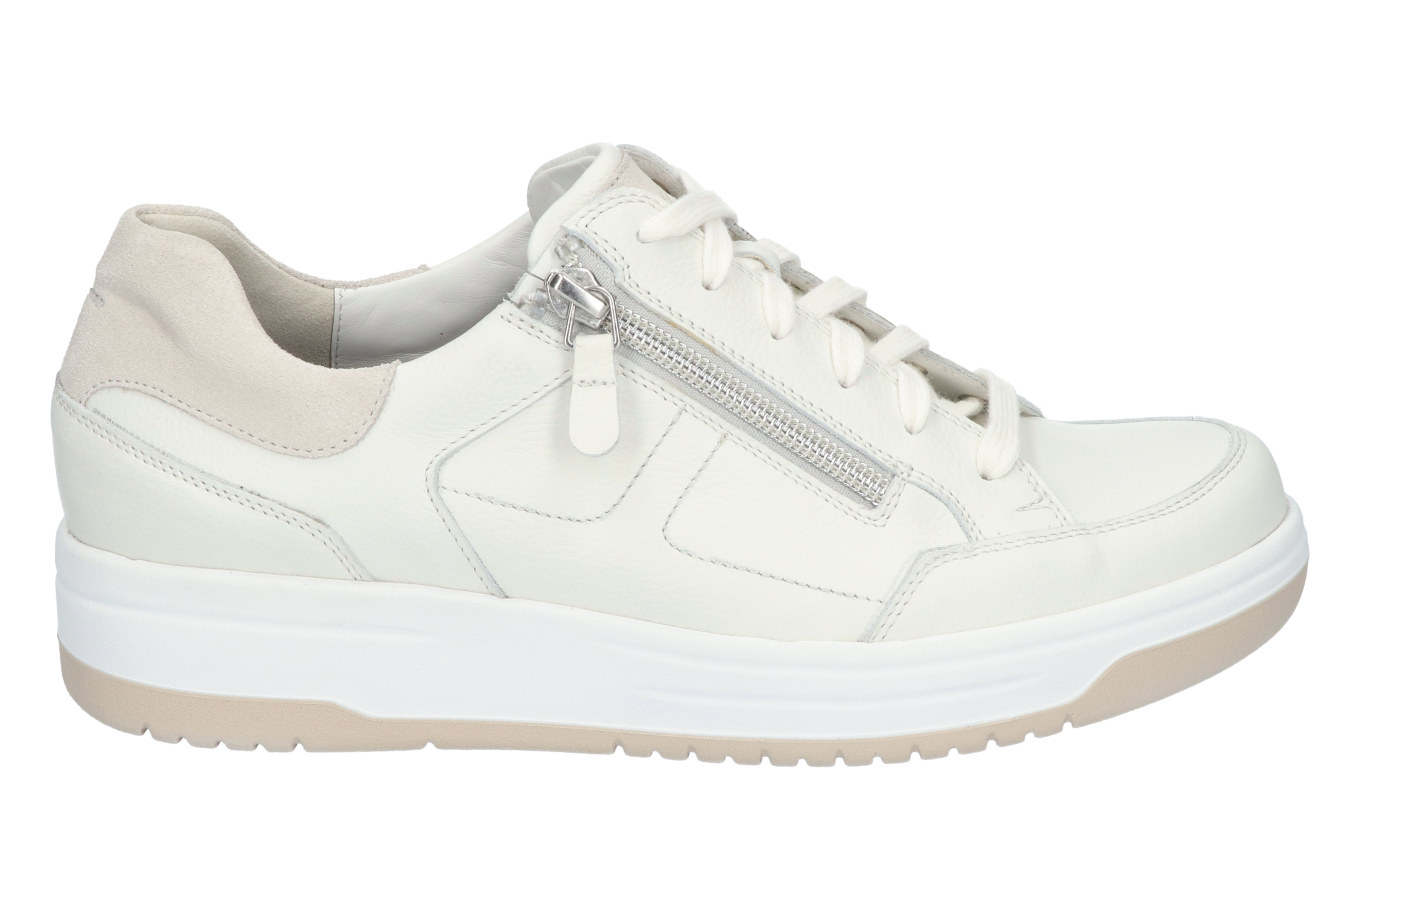 Sneaker 6281 wit/offwhite 0448